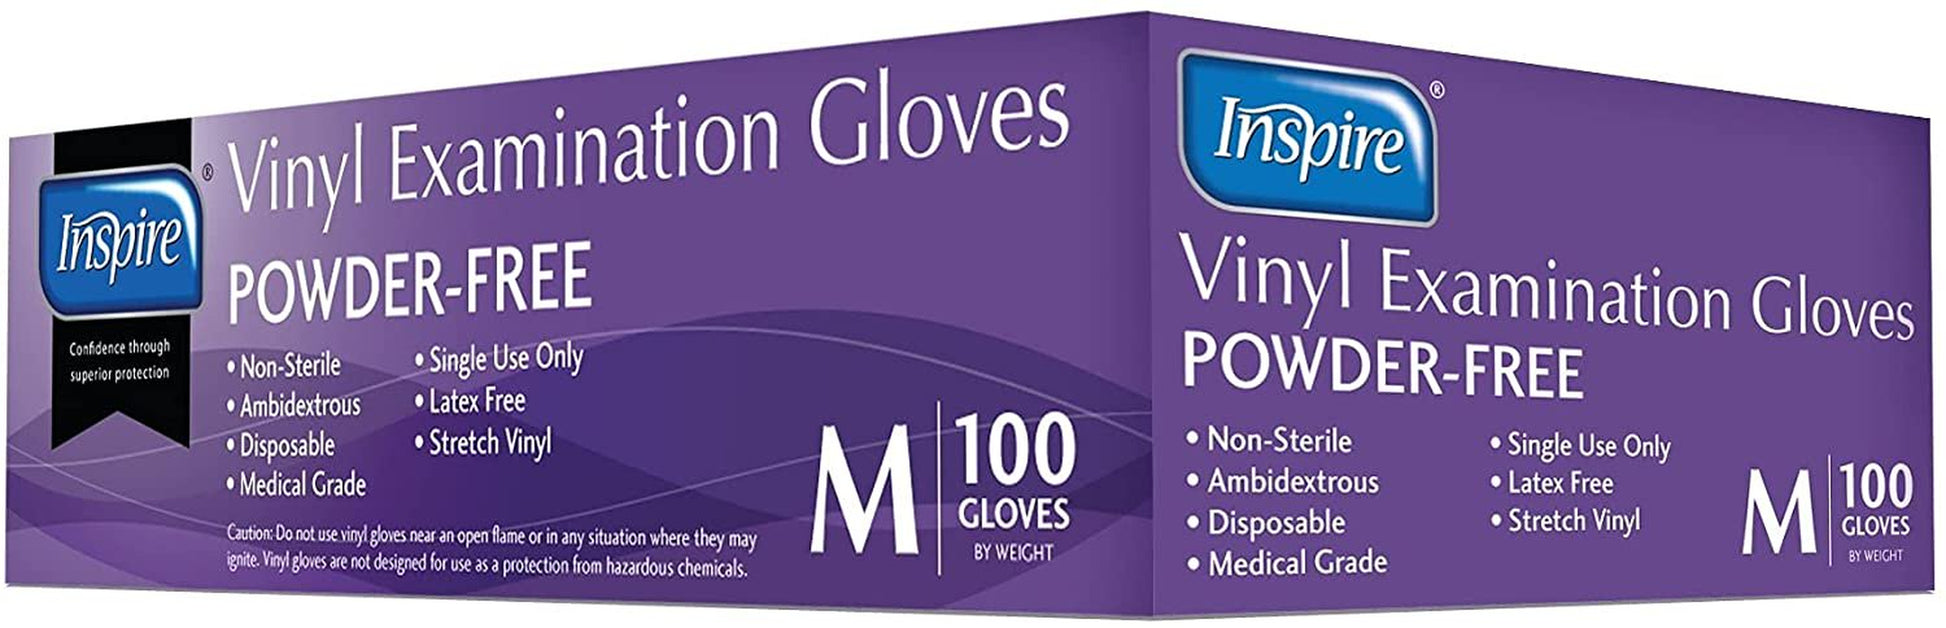 Inspire Stretch Vinyl Exam Gloves | the ORIGINAL Quality Vinyl Gloves Disposable Latex Free Medical Gloves Cleaning Gloves (Case 1000, 10 Packs of 100)